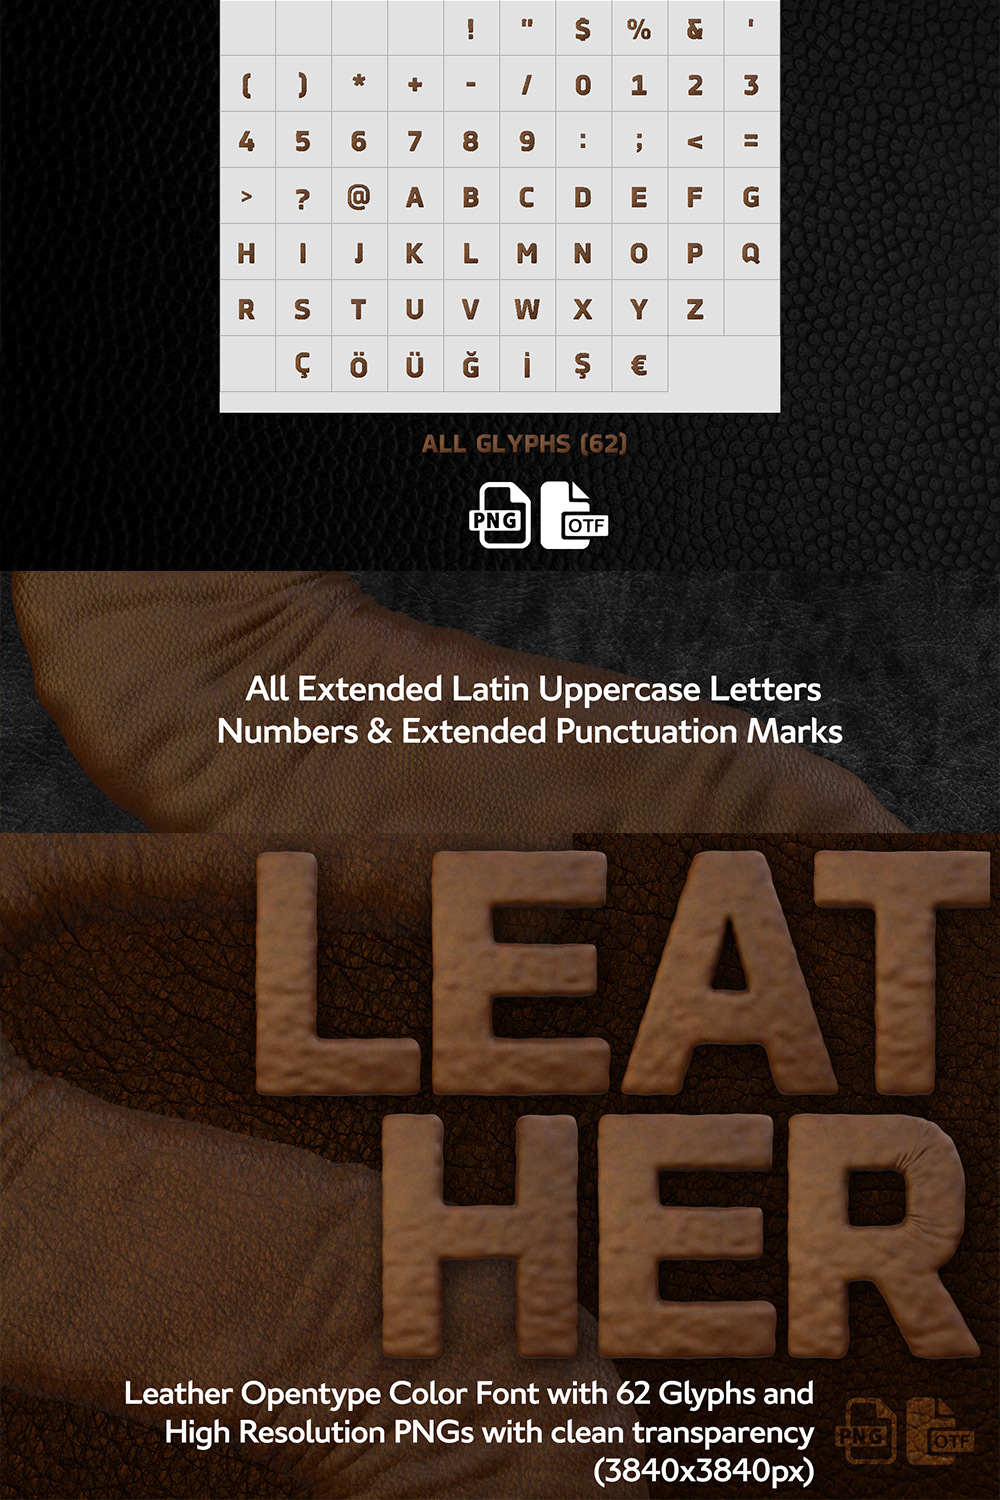 MS Leather Color Font and PNG pinterest image.